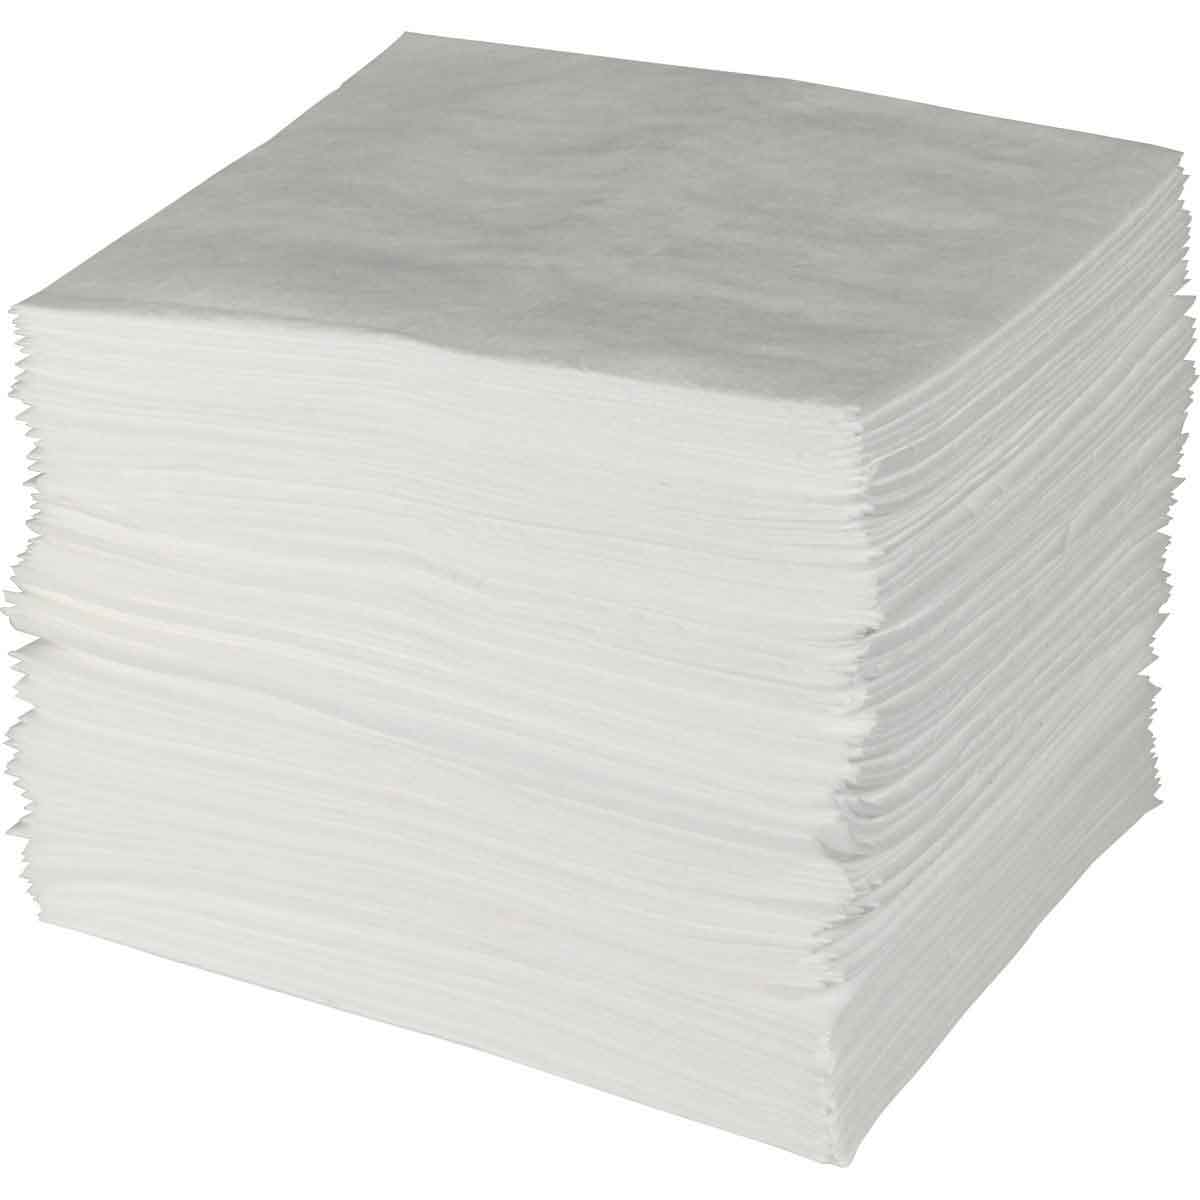 50 SORBENT PADS ESP UNIVERSAL HEAVY WEIGHT LAMINATED ABSORBENT PAD OIL/WATTER 